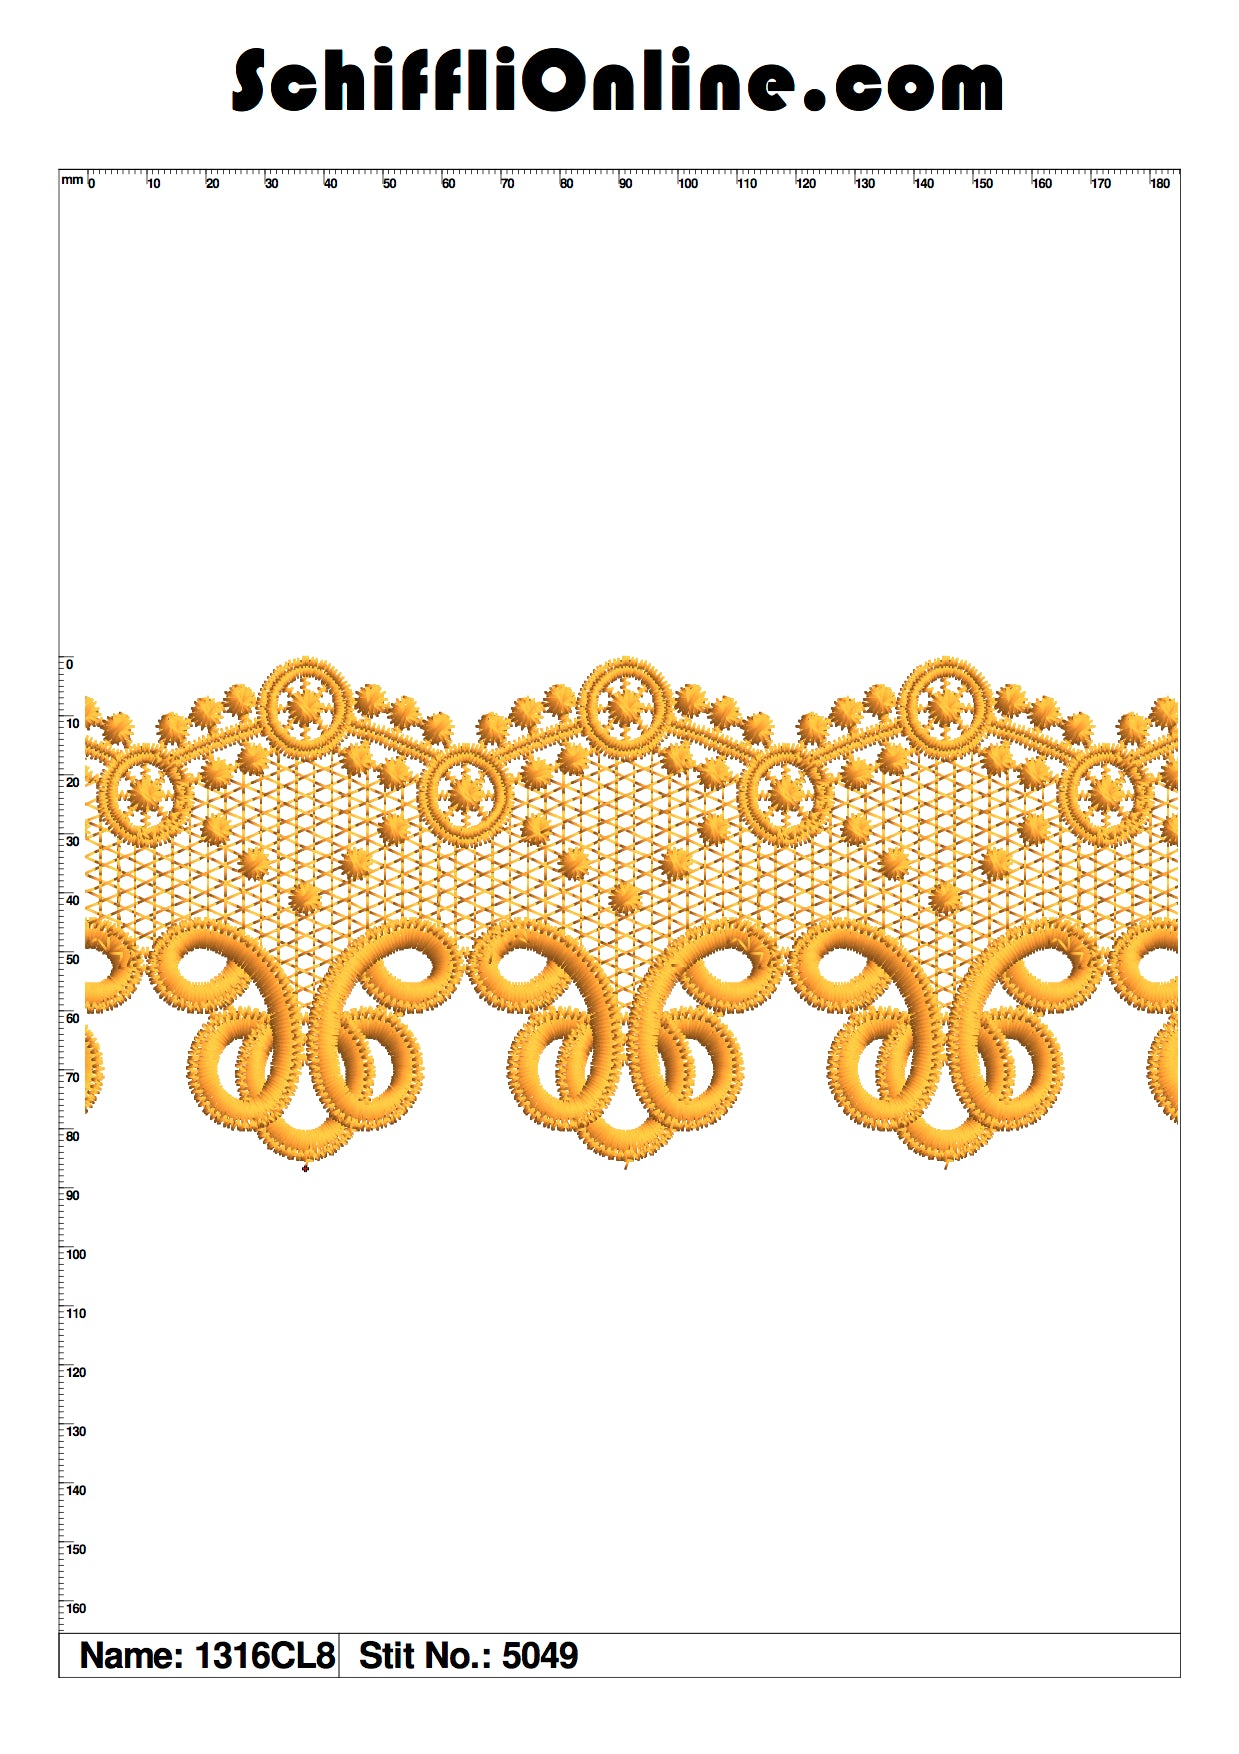 Book 143 CHEMICAL LACE 8X4 50 DESIGNS